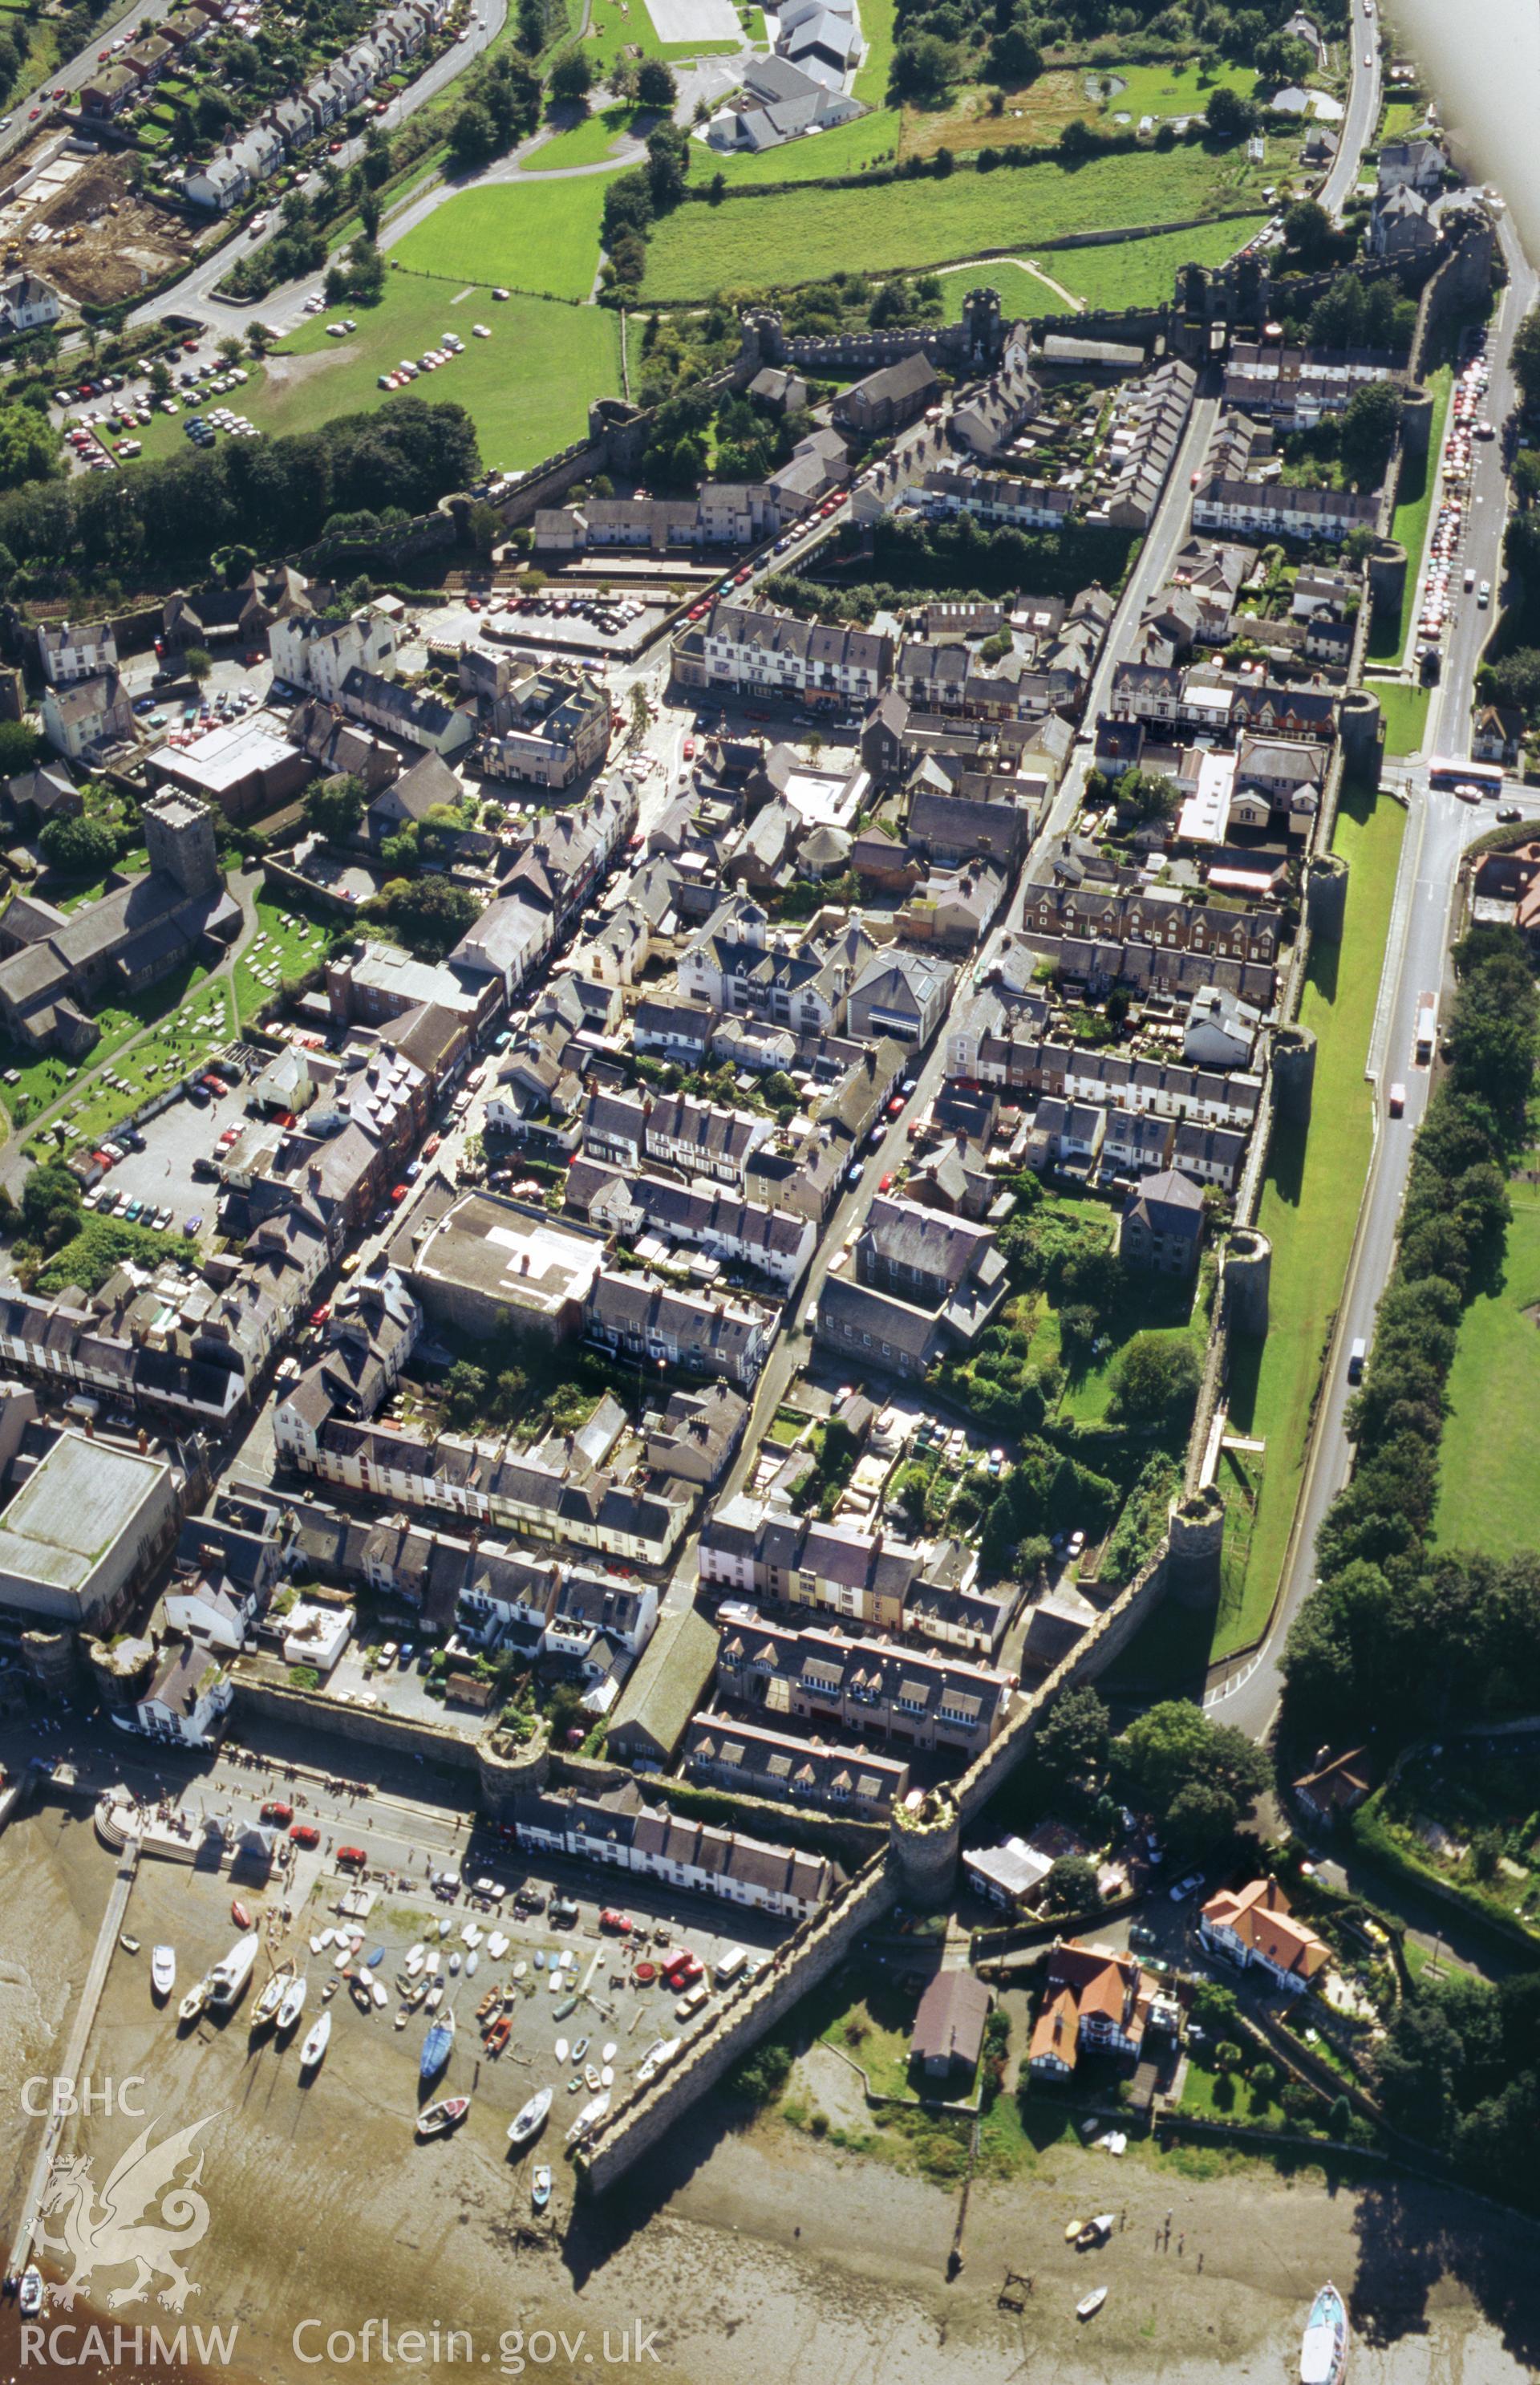 RCAHMW colour oblique aerial photograph showing the town walls at Conwy. Taken by Toby Driver 2004.